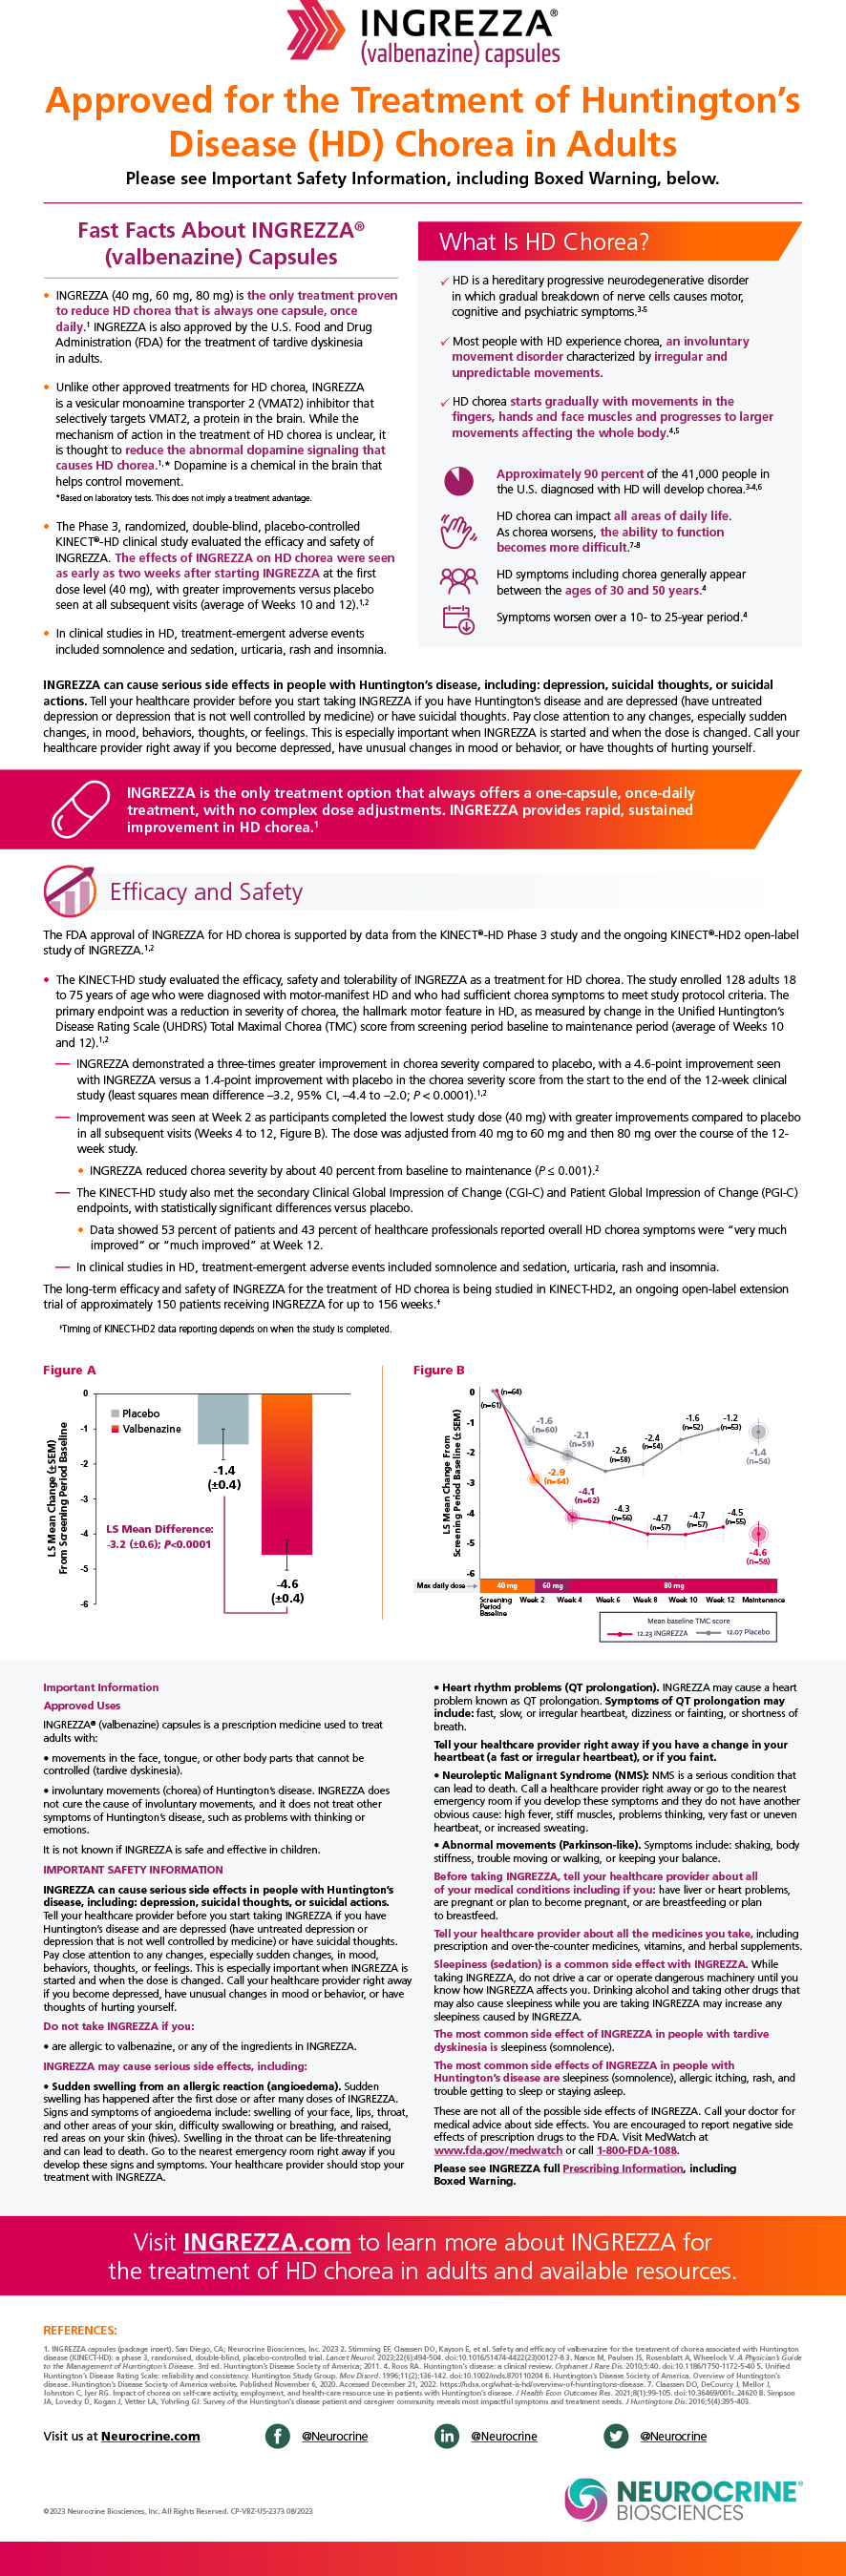 Fact sheet providing an overview of INGREZZA approved for chorea associated with Huntington's disease, including safety and efficacy information